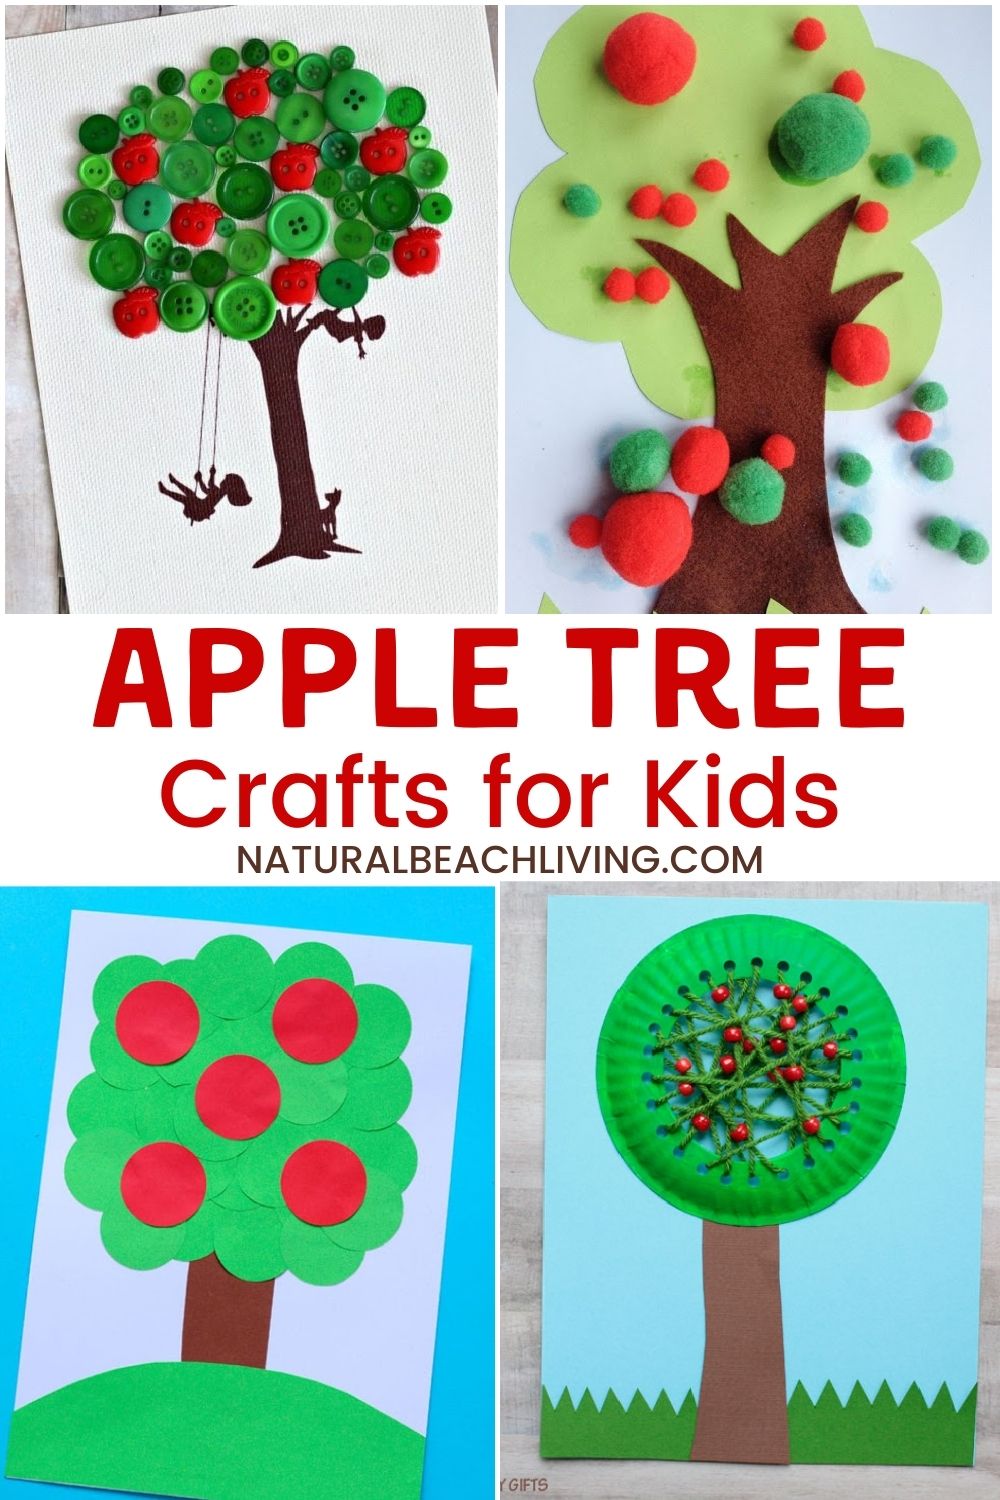 Apple trees are one of the best fall themes. Whether you're eating them, picking them, or crafting with them, everyone loves apples! Here are 16 apple tree crafts for kids to inspire you and your little ones this season. Apple Preschool Crafts